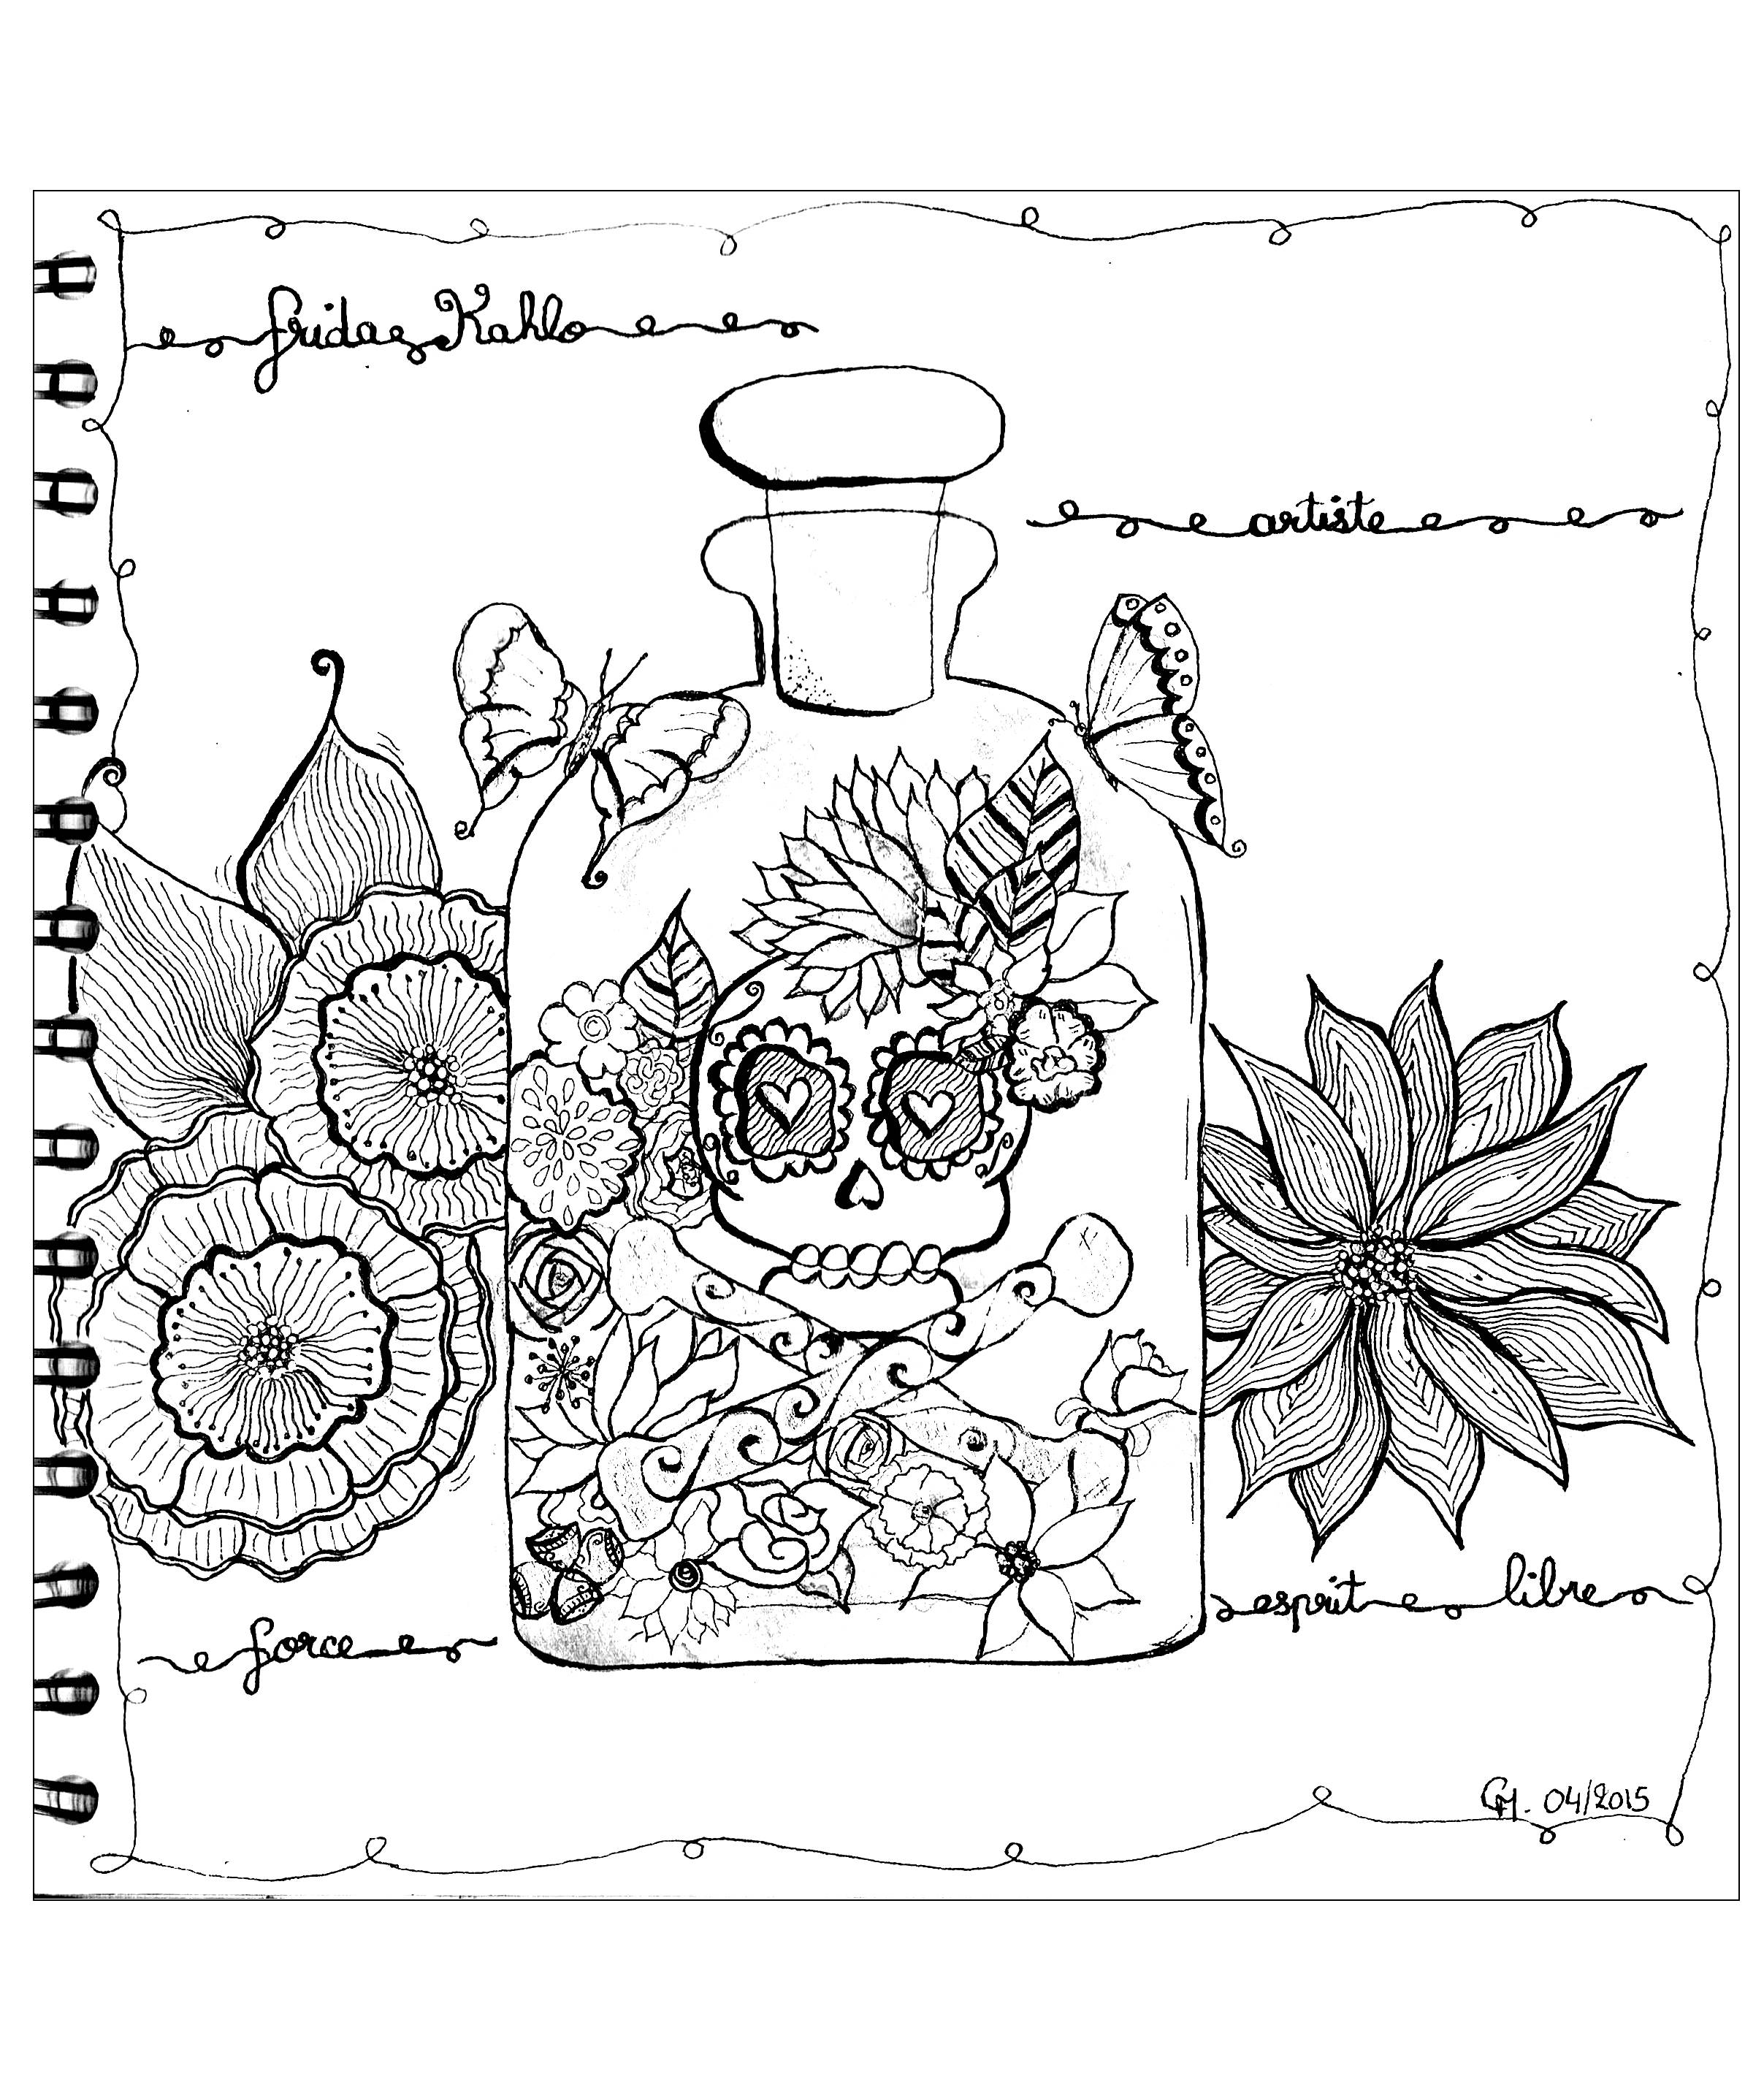 'Hommage to Frida Khalo', exclusive coloring page See the original work, Artist : Cathy M